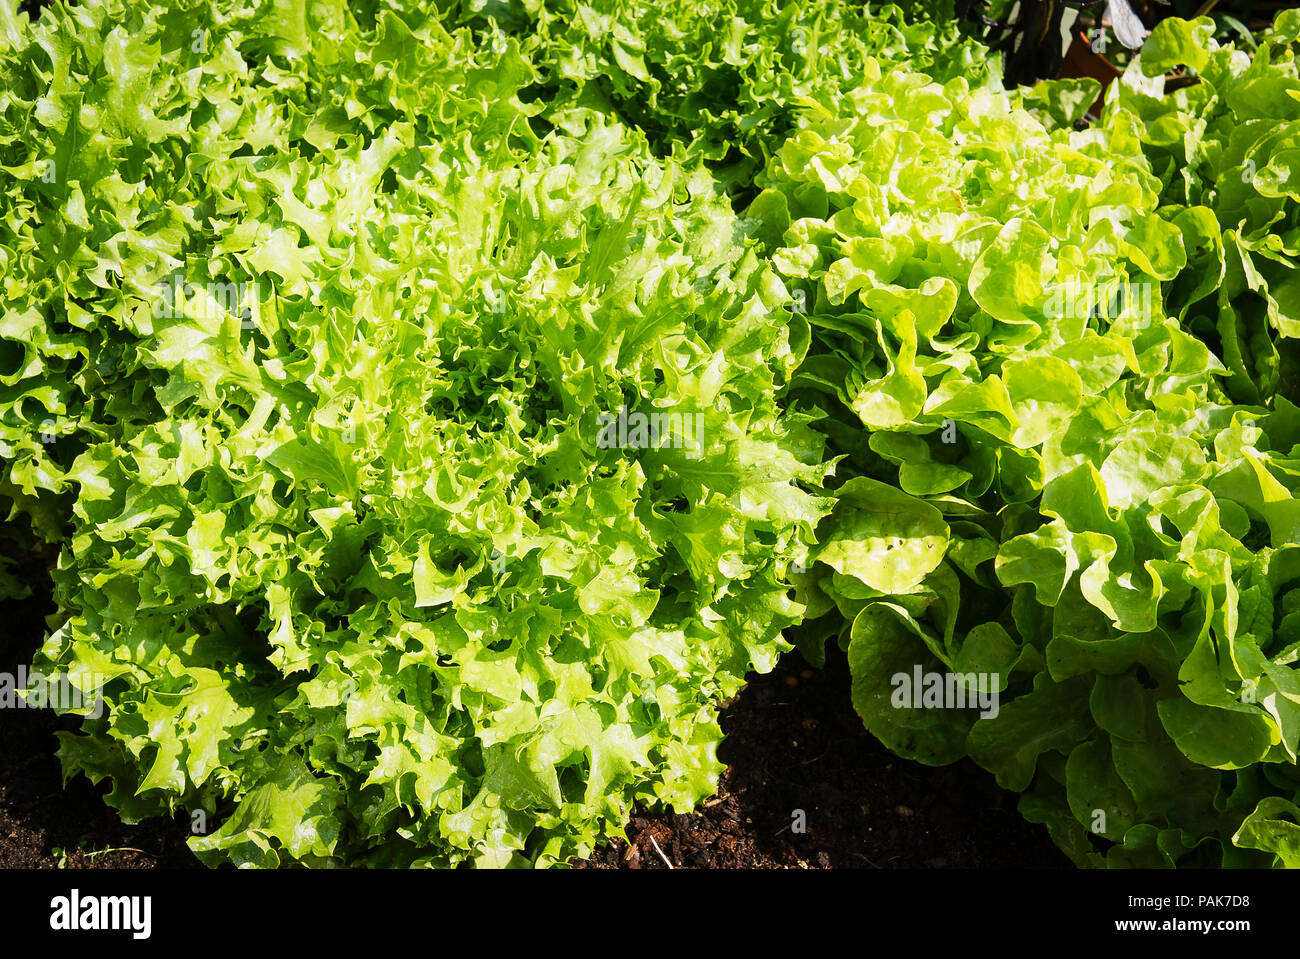 Two different types of loose leaf lettuce: Green Batavian and Green Oakleaf grown in a planter at home from small plug plants in UK Stock Photo